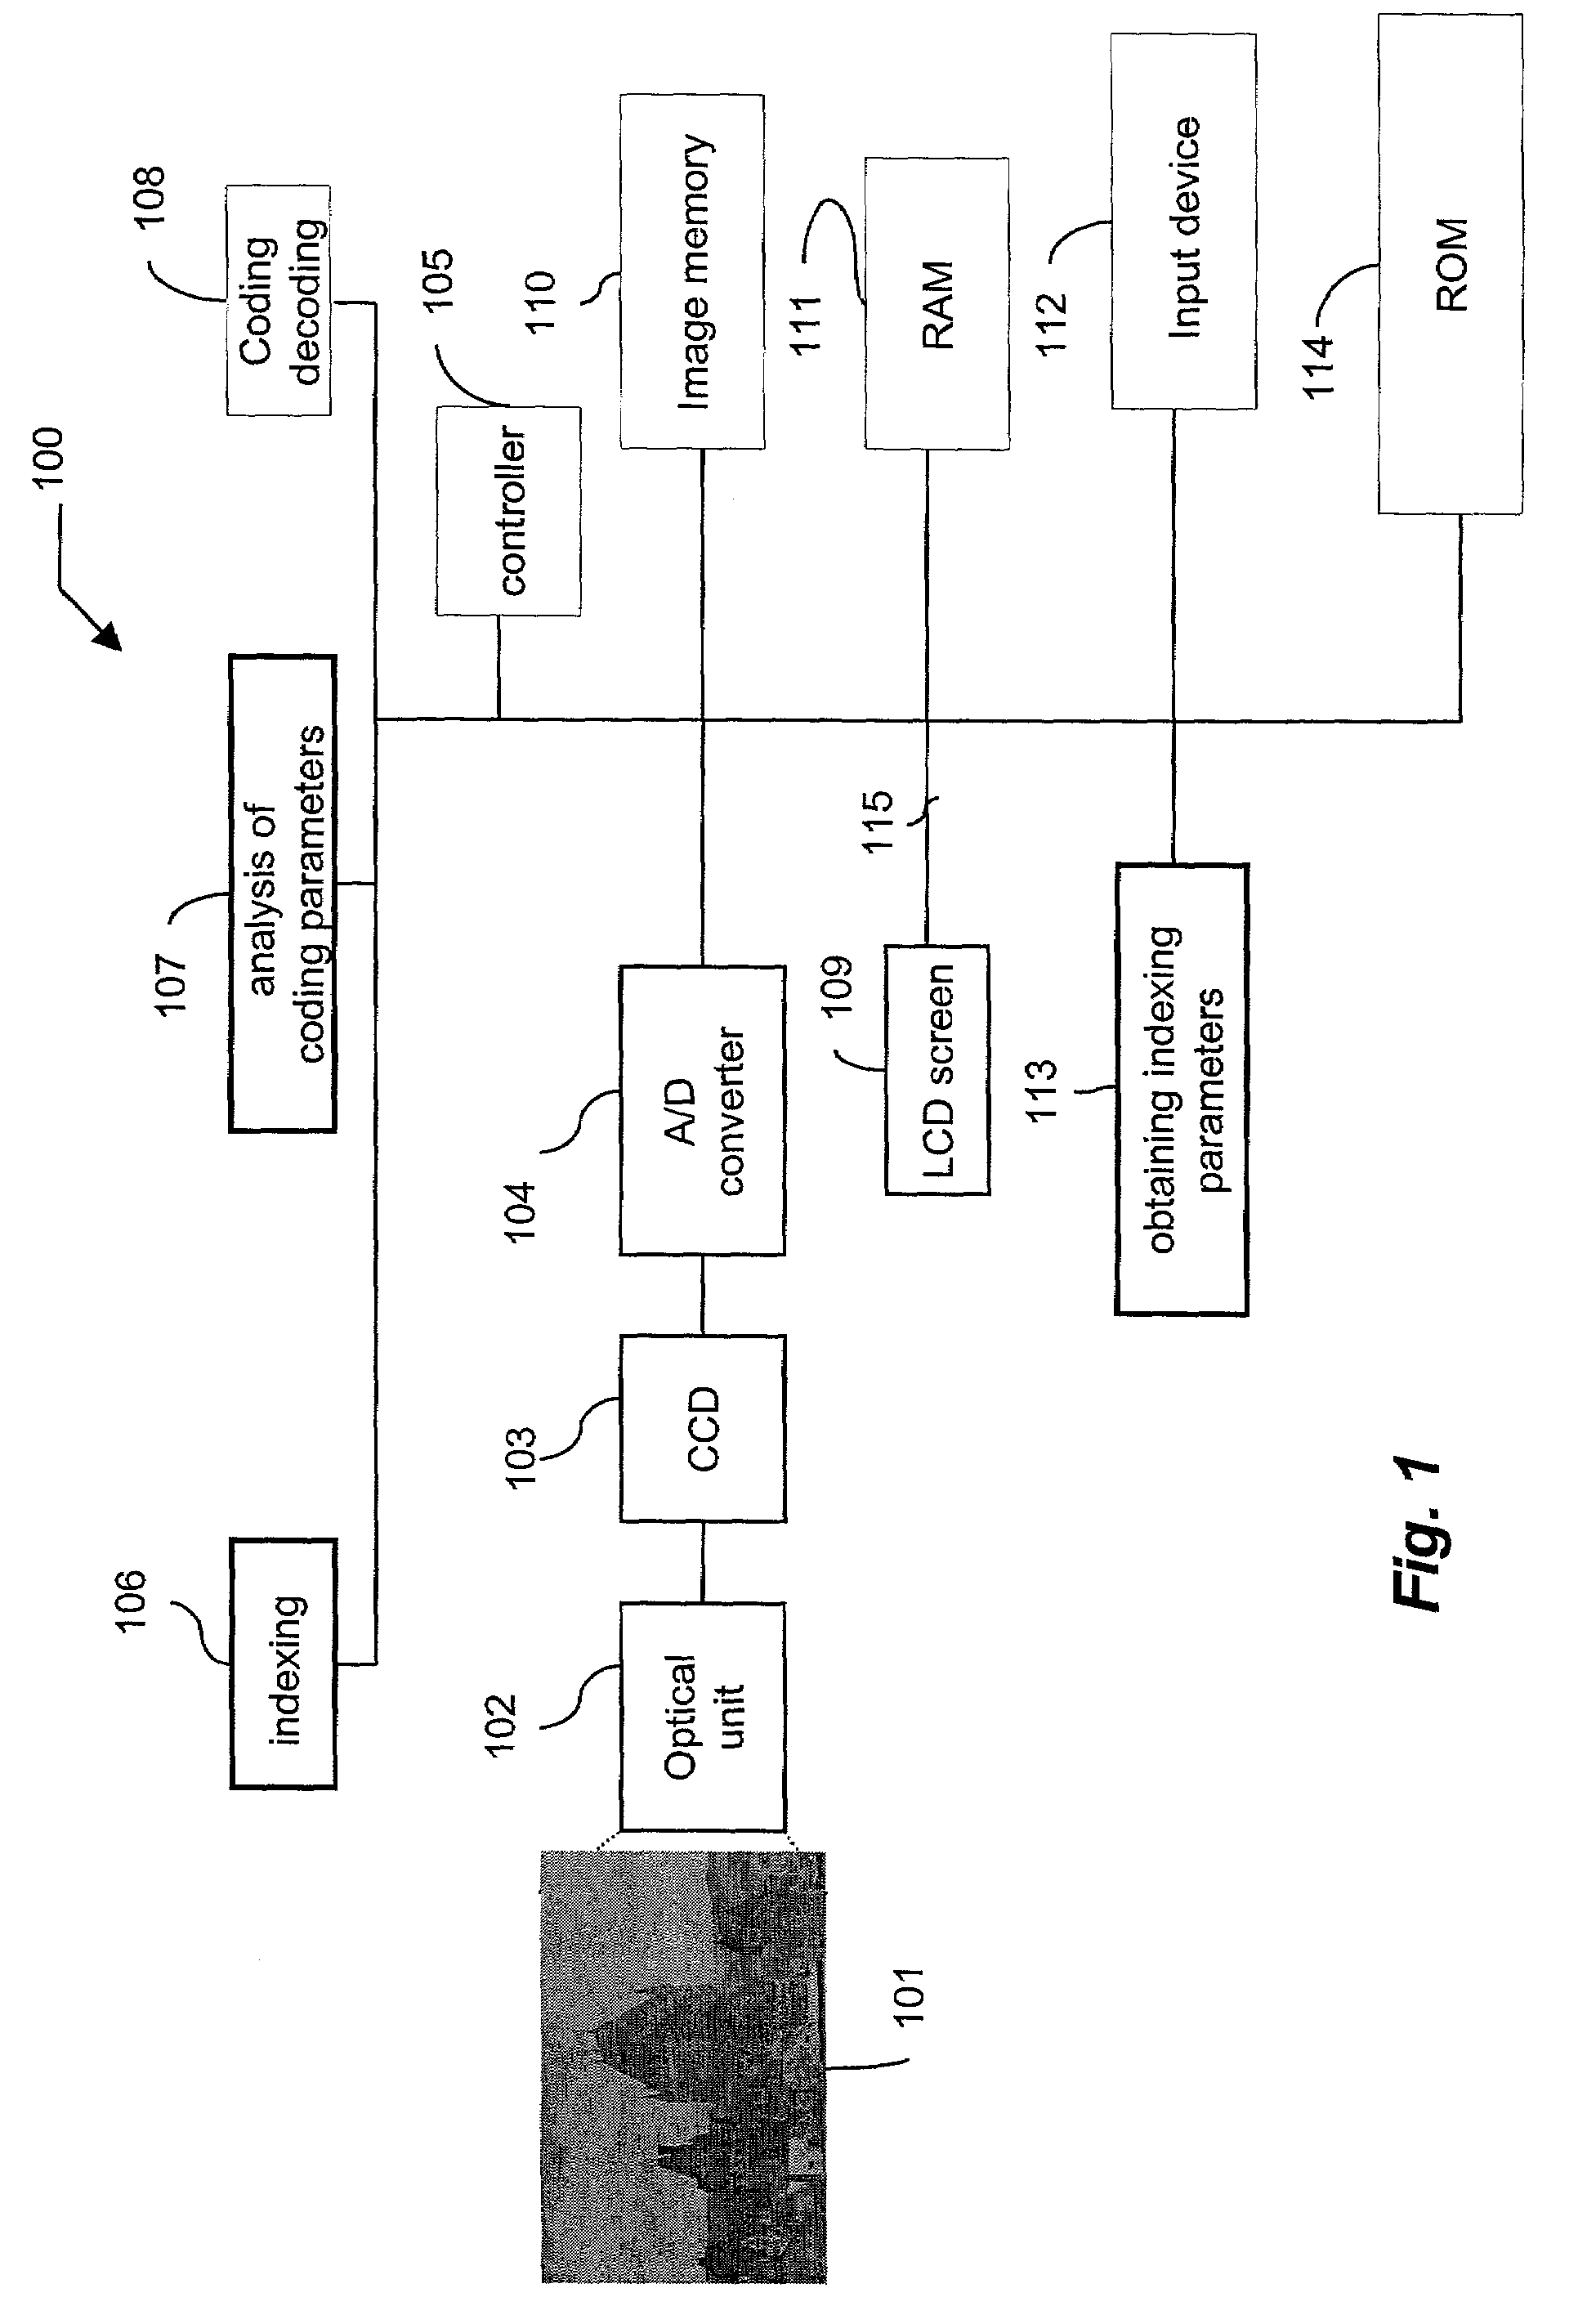 Method and device for compressing and/or indexing digital images